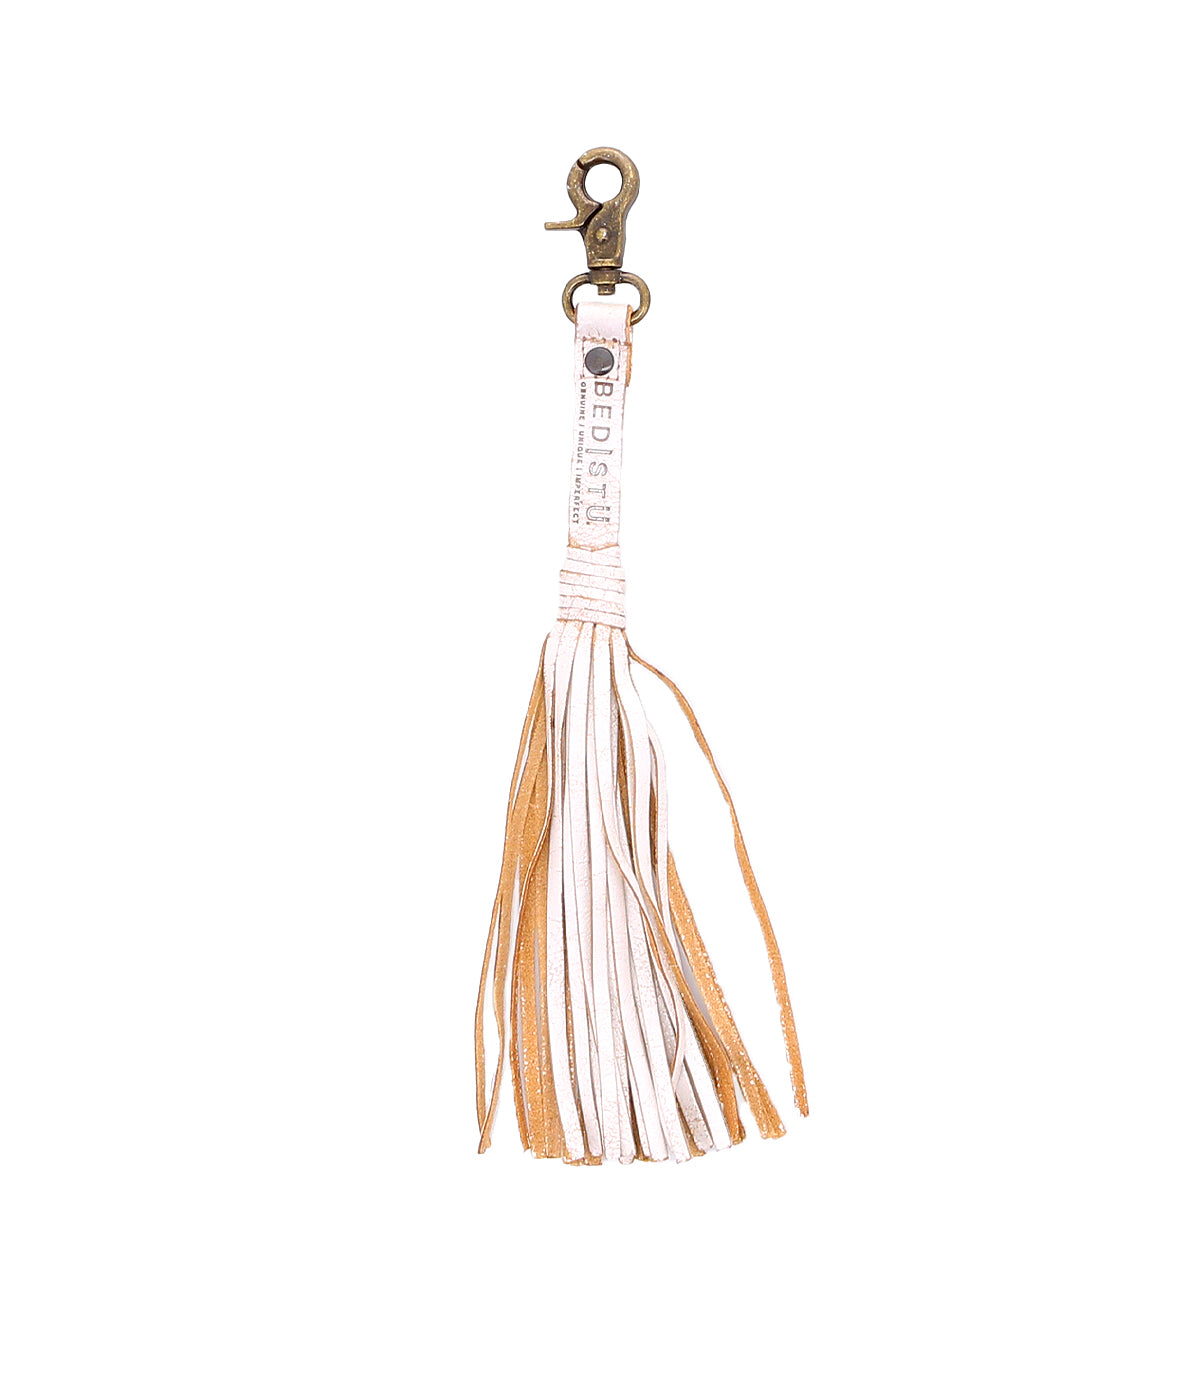 A white leather Tassel Clip keychain with tan tassels, perfect for adding a touch of personal expression to your accessories.